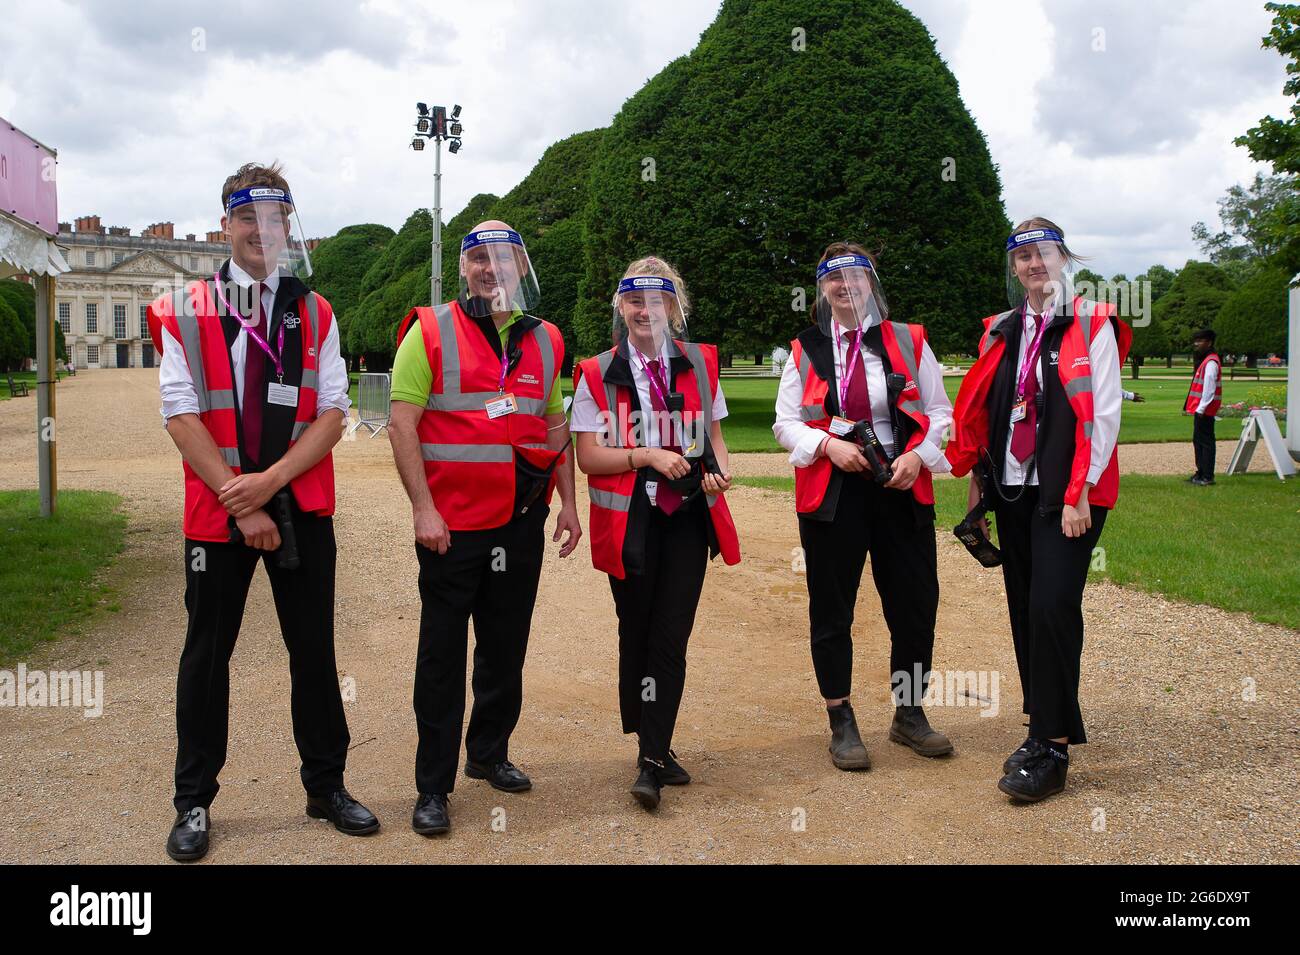 East Molesey, Surrey, UK. 5th July, 2021. Workers at the RHS Hampton Court Palace Garden Festival wearing face sheilds due to the Covid-19 lockdown. Boris Johnson has announced today that from 19th July 2021, it will no longer be mandatory to wear face masks or face coverings in most situations. Credit: Maureen McLean/Alamy Live News Stock Photo